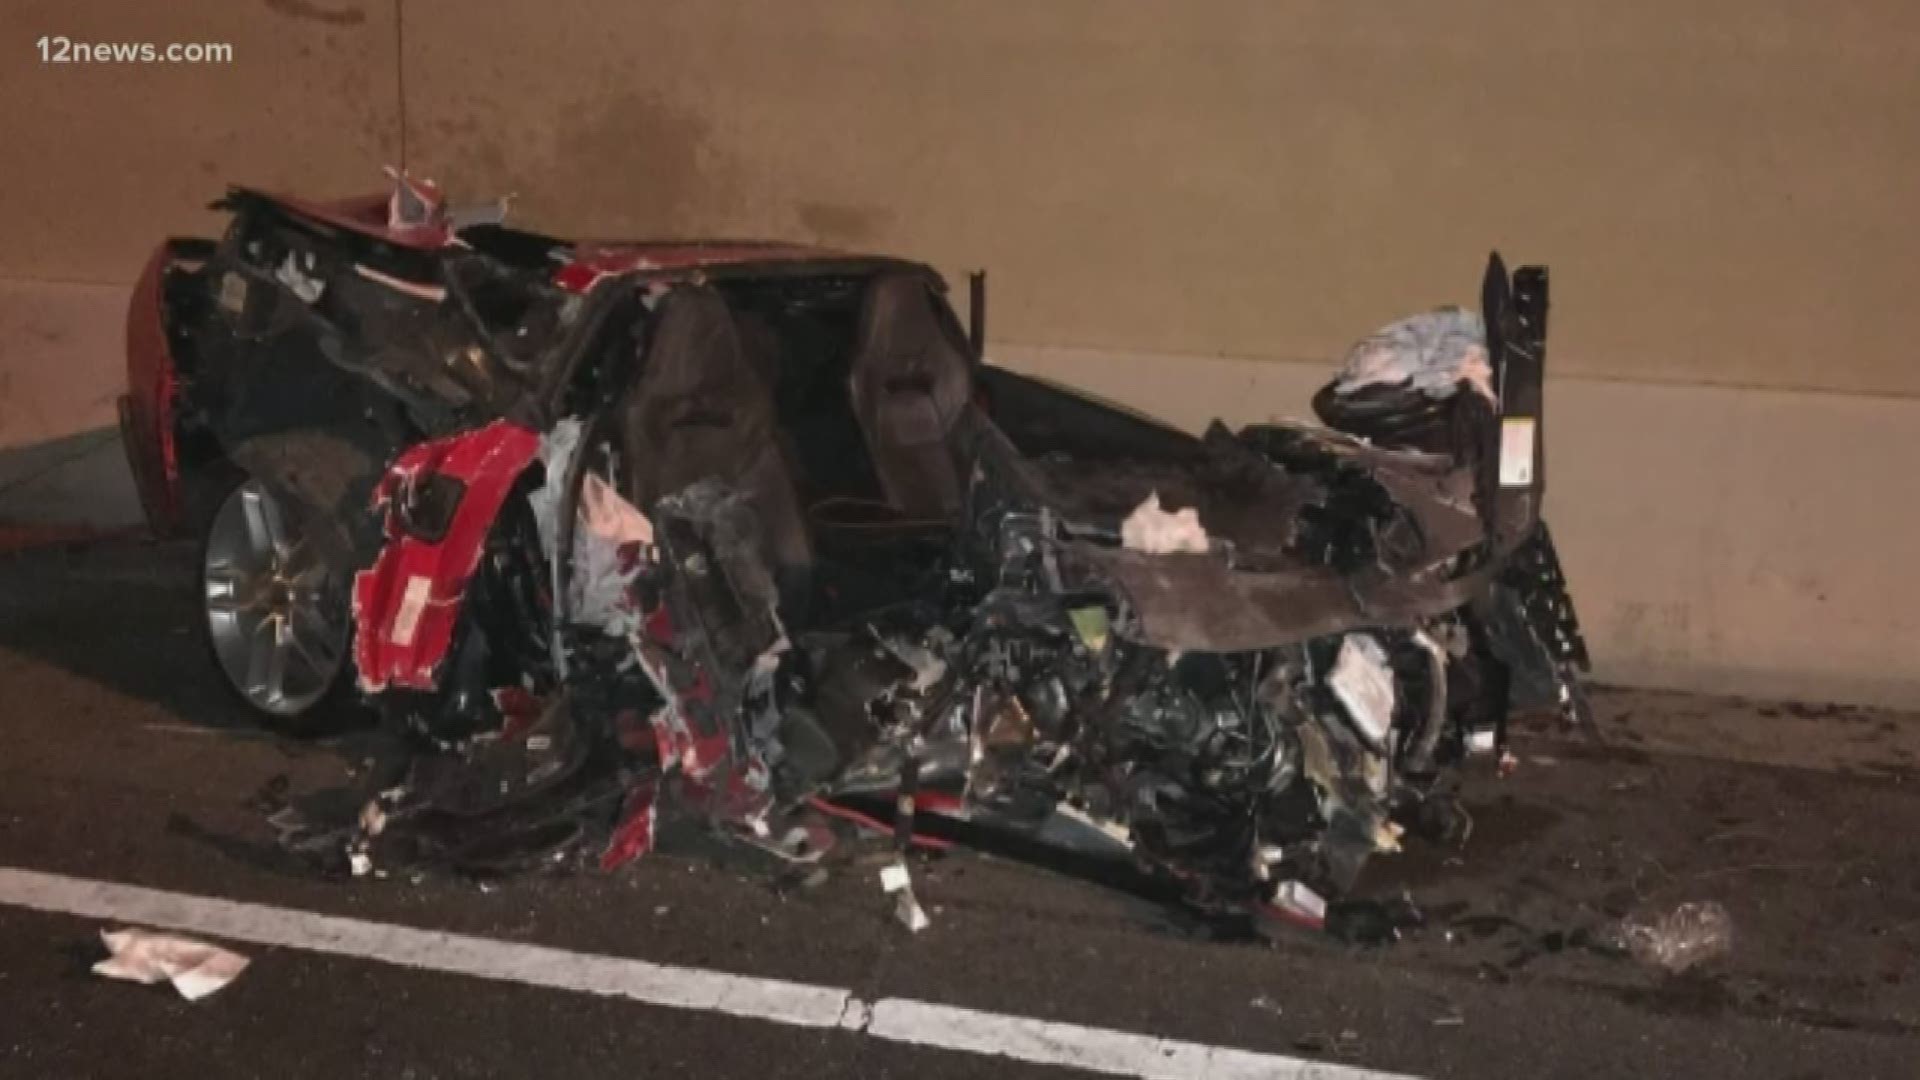 Investigators believe the driver was under the influence of alcohol or drugs when he hit two Tempe officers overnight. Everyone is expected to recover.